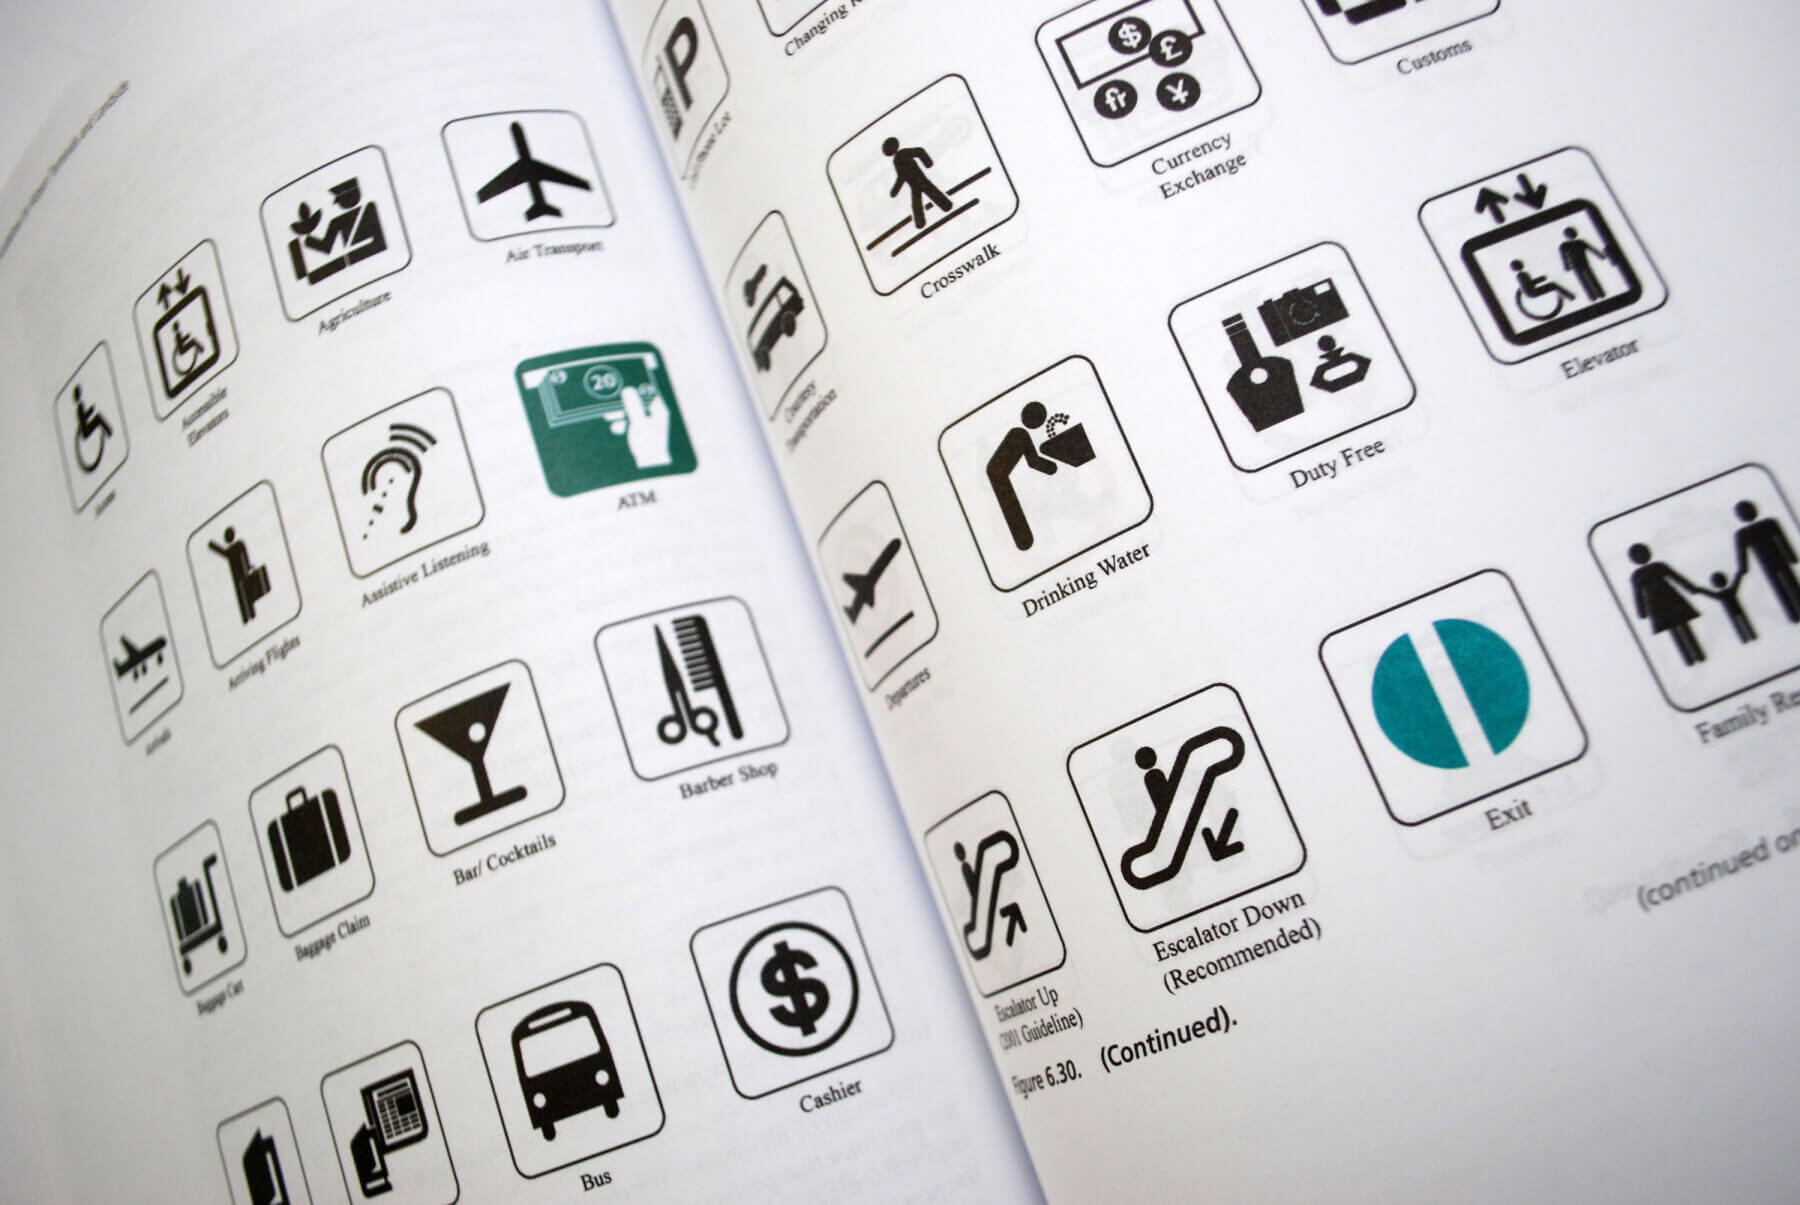 a close up of a page inside ACRP research report 52 with images of wayfinding symbols